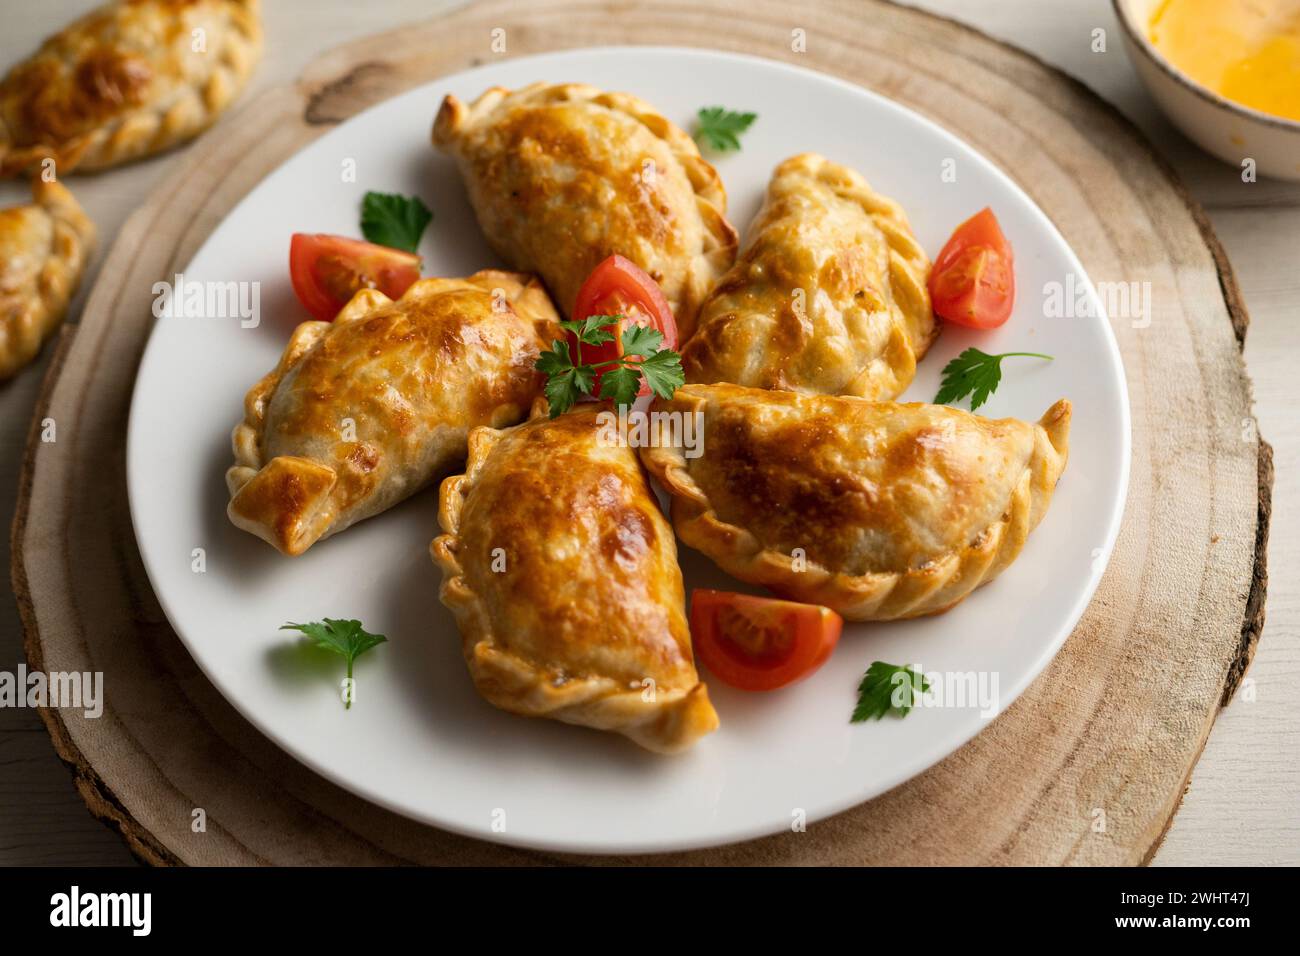 Baking delicious Argentine empanadas with chicken and vegetables. Stock Photo